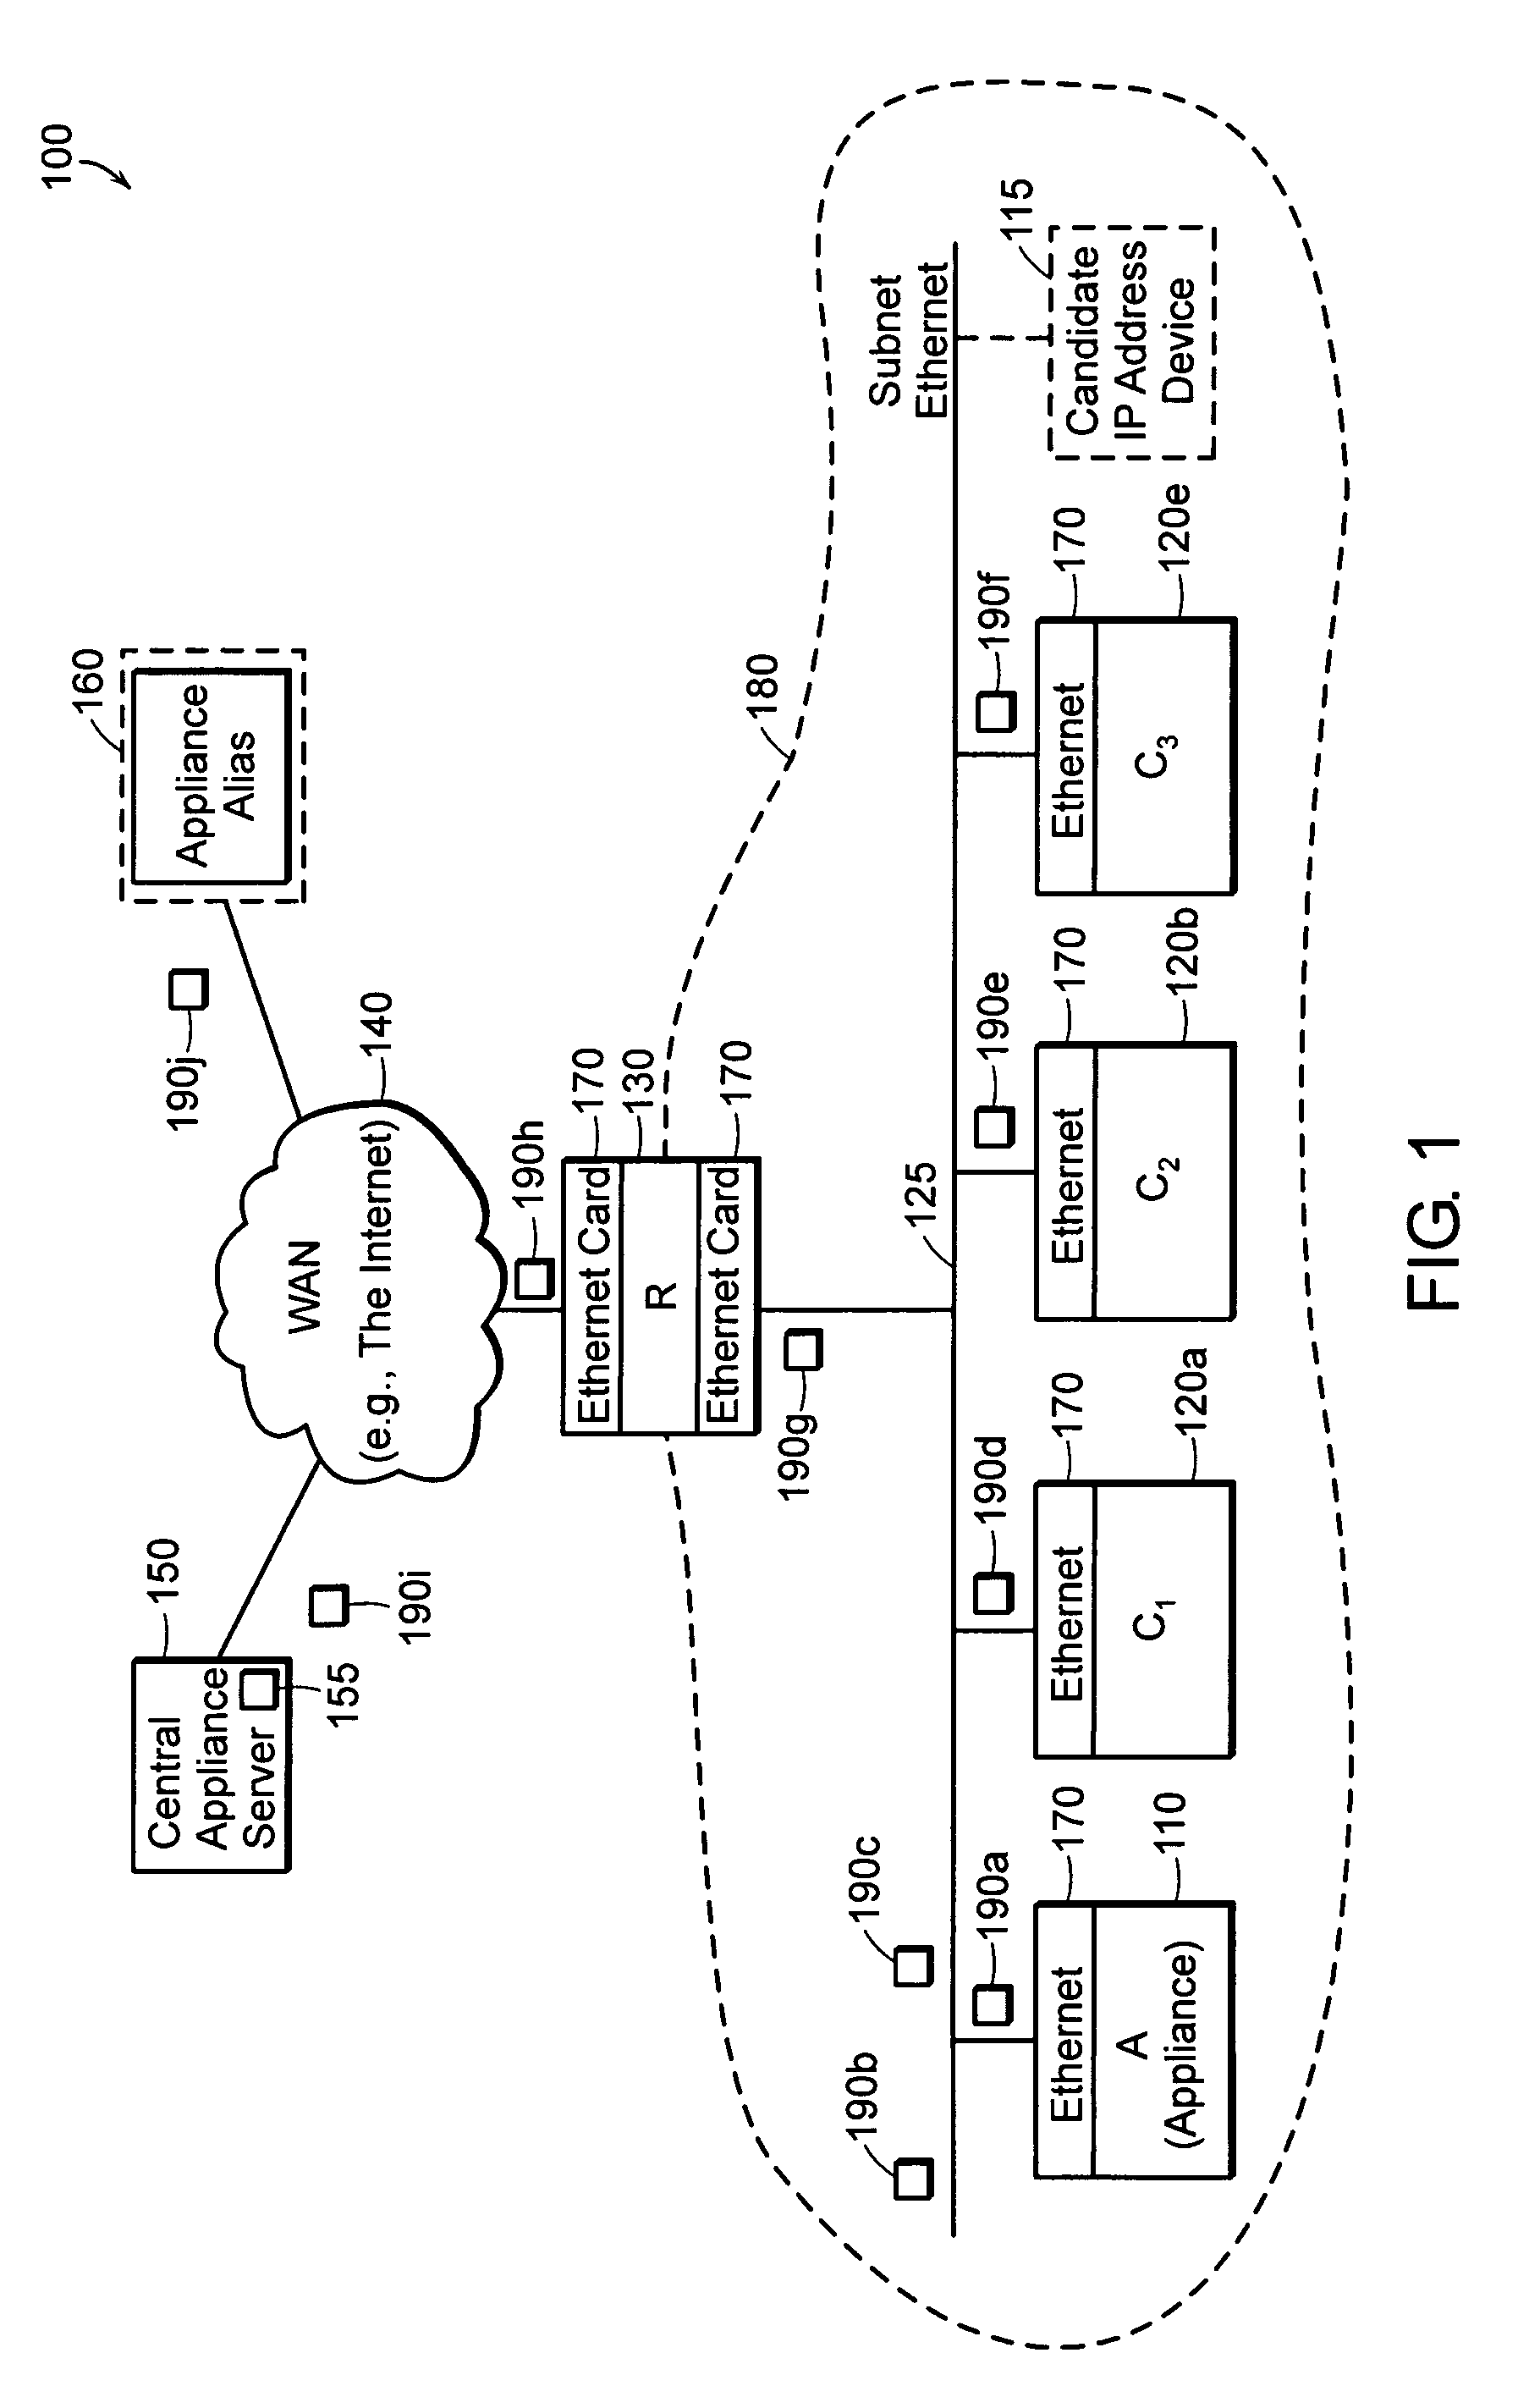 Method and apparatus for automatic network address assignment